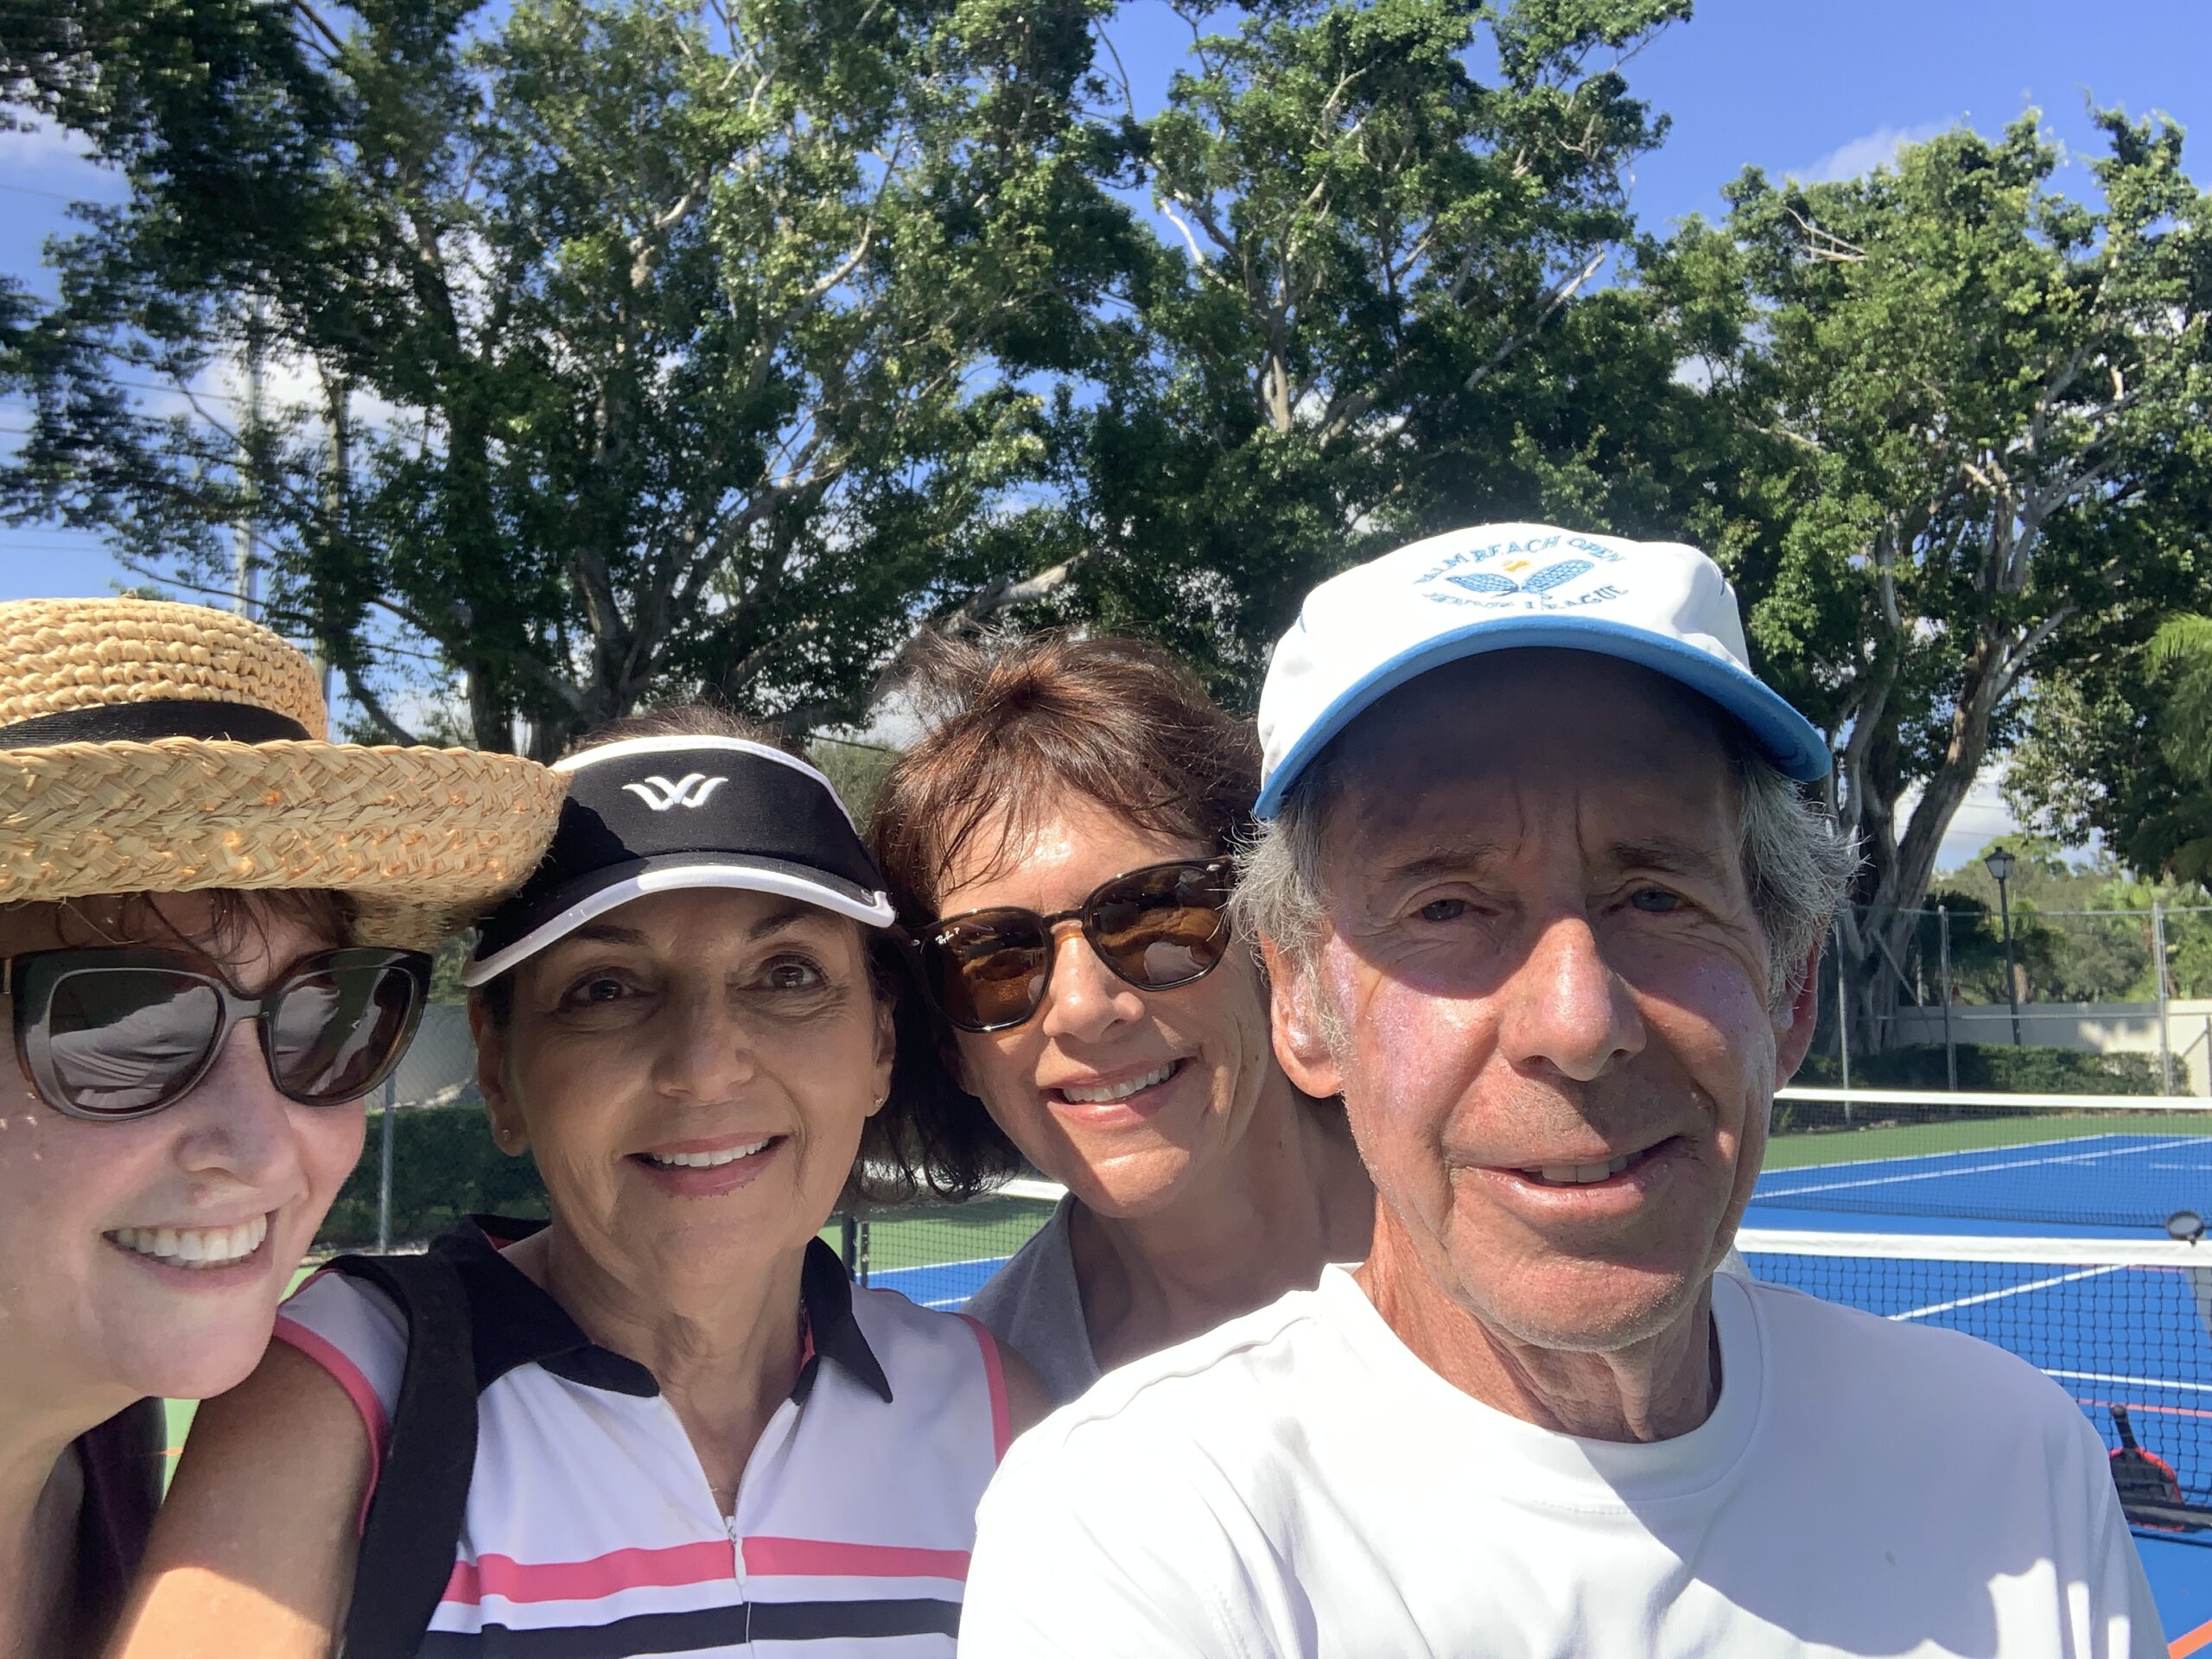 A wonderful group of women who are taking pickleball lessons from me in one of the communities in Boynton Beach, FL